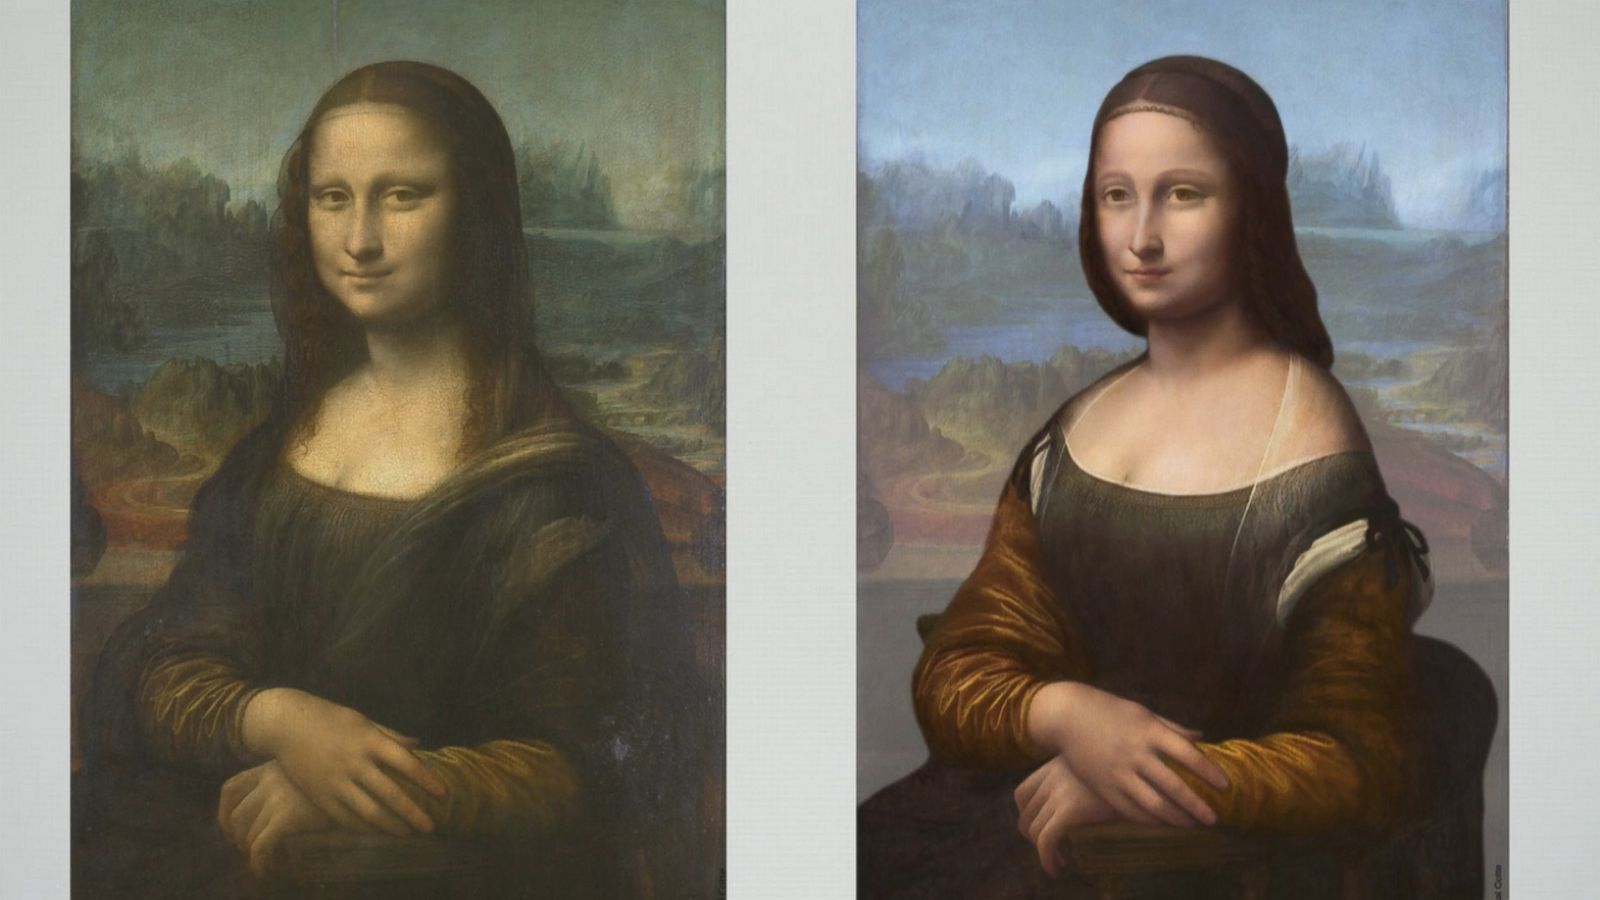 Clever Artist Recreates the 'Mona Lisa' From Potatoes